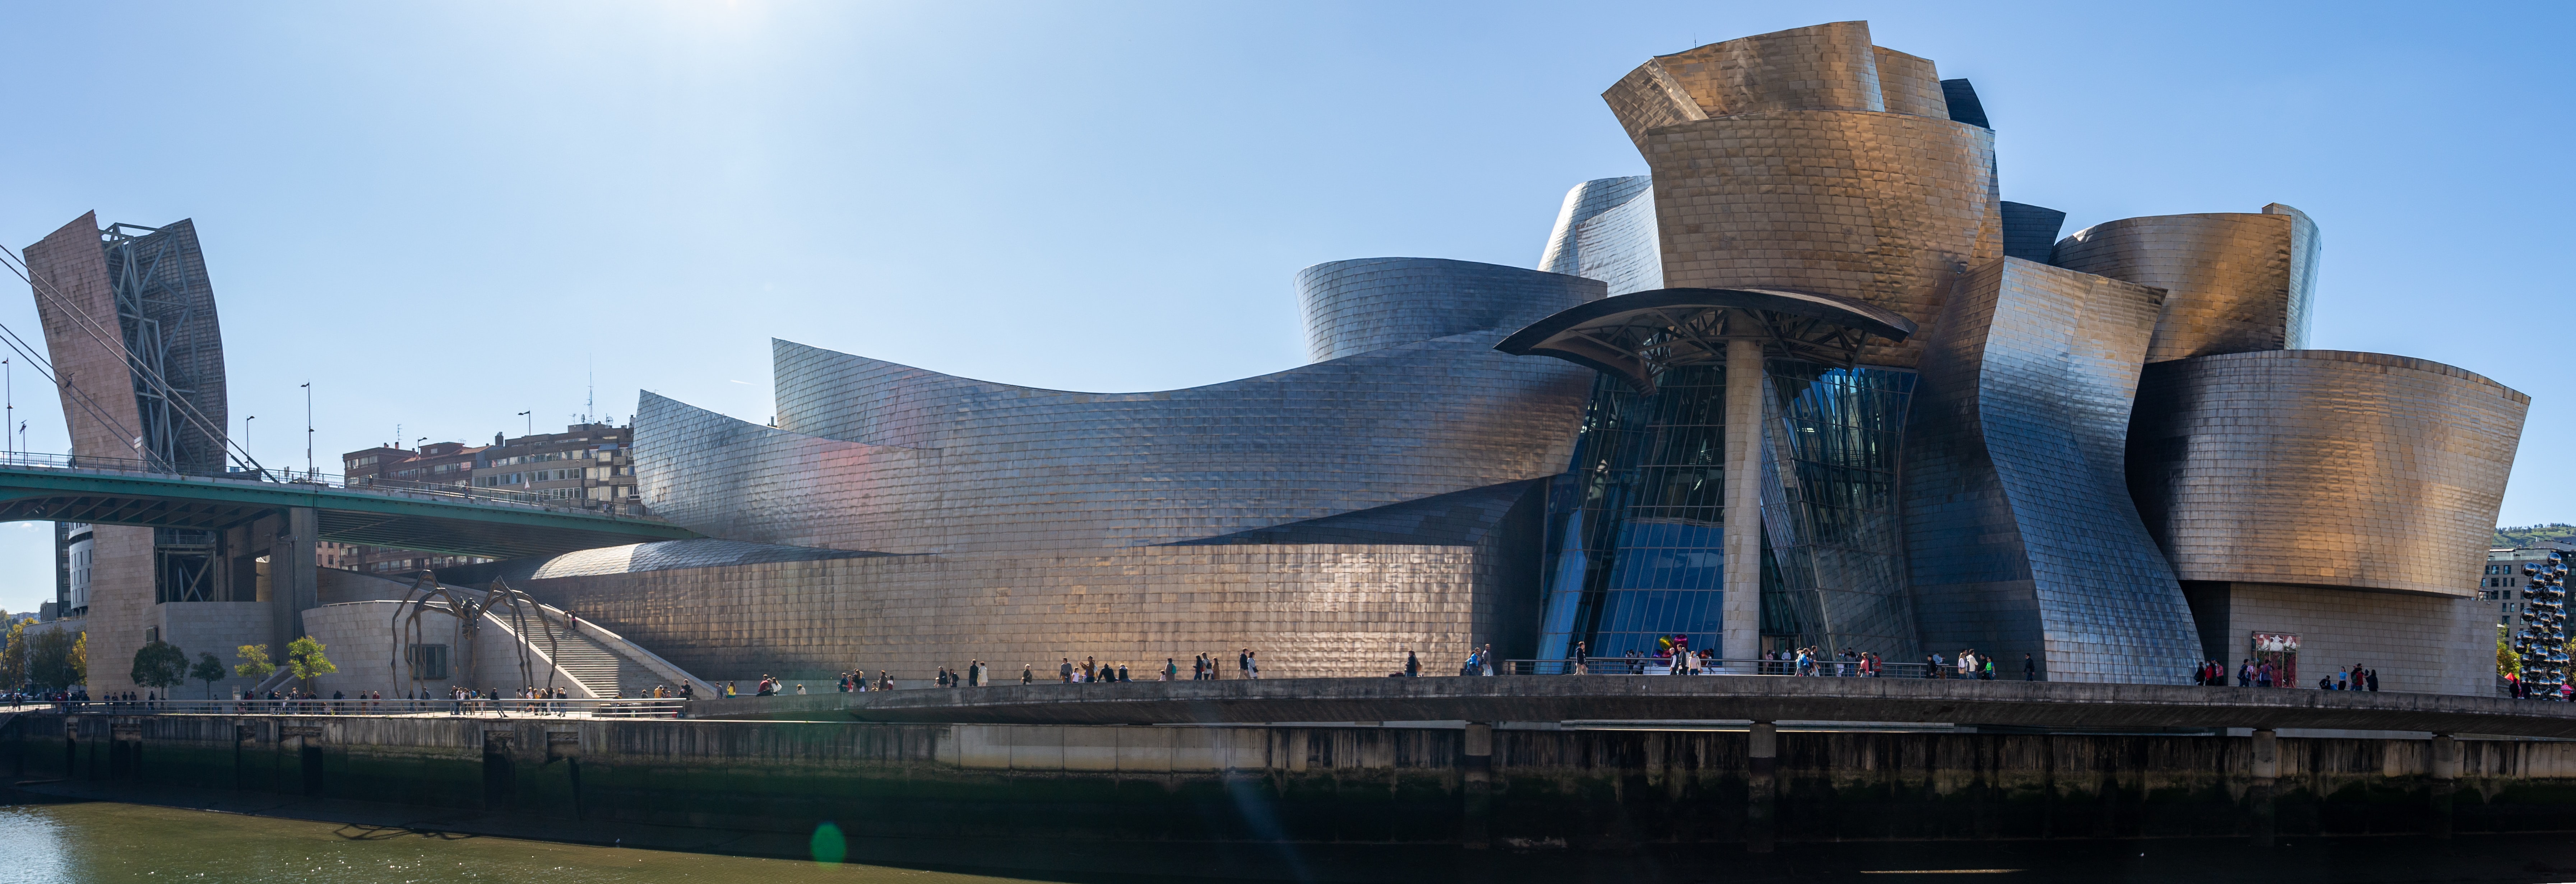 The Guggenheim Museum Bilbao and its magnificent architecture